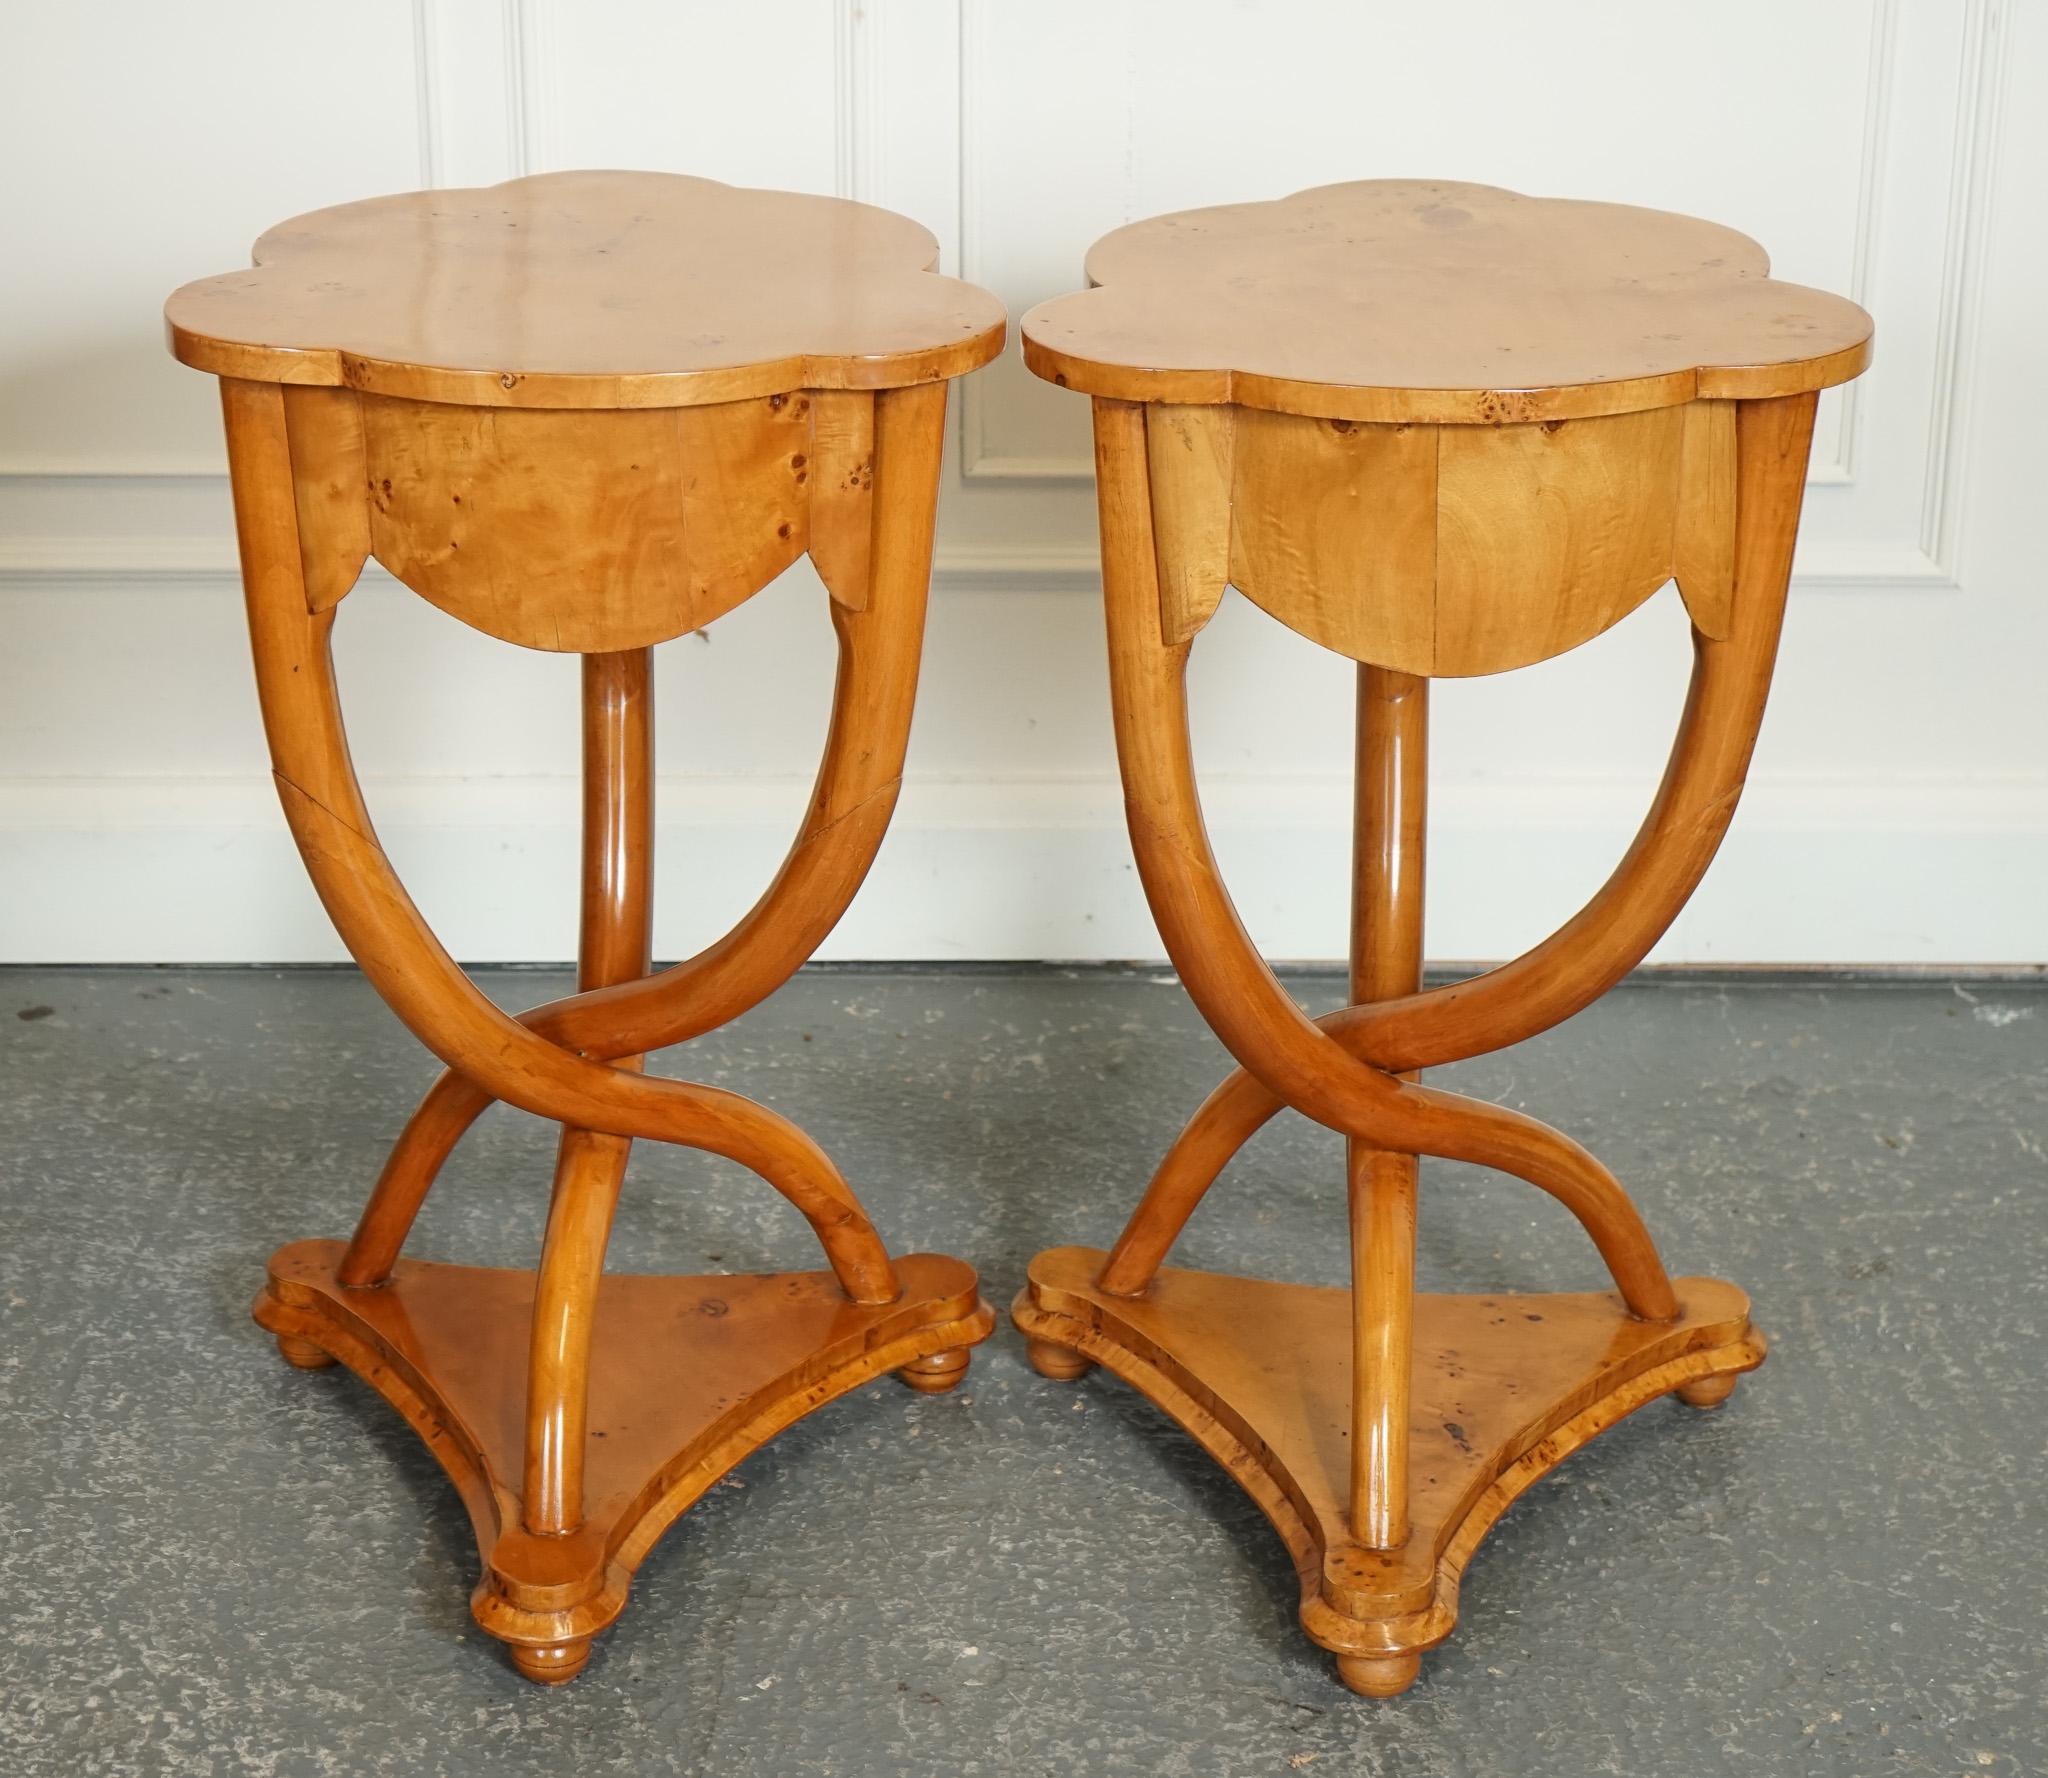 Art Deco PAIR ART DECO WALNUT OCCASIONAL BEDSIDE NiGHTSTAND TABLES CURVED LEGS J1